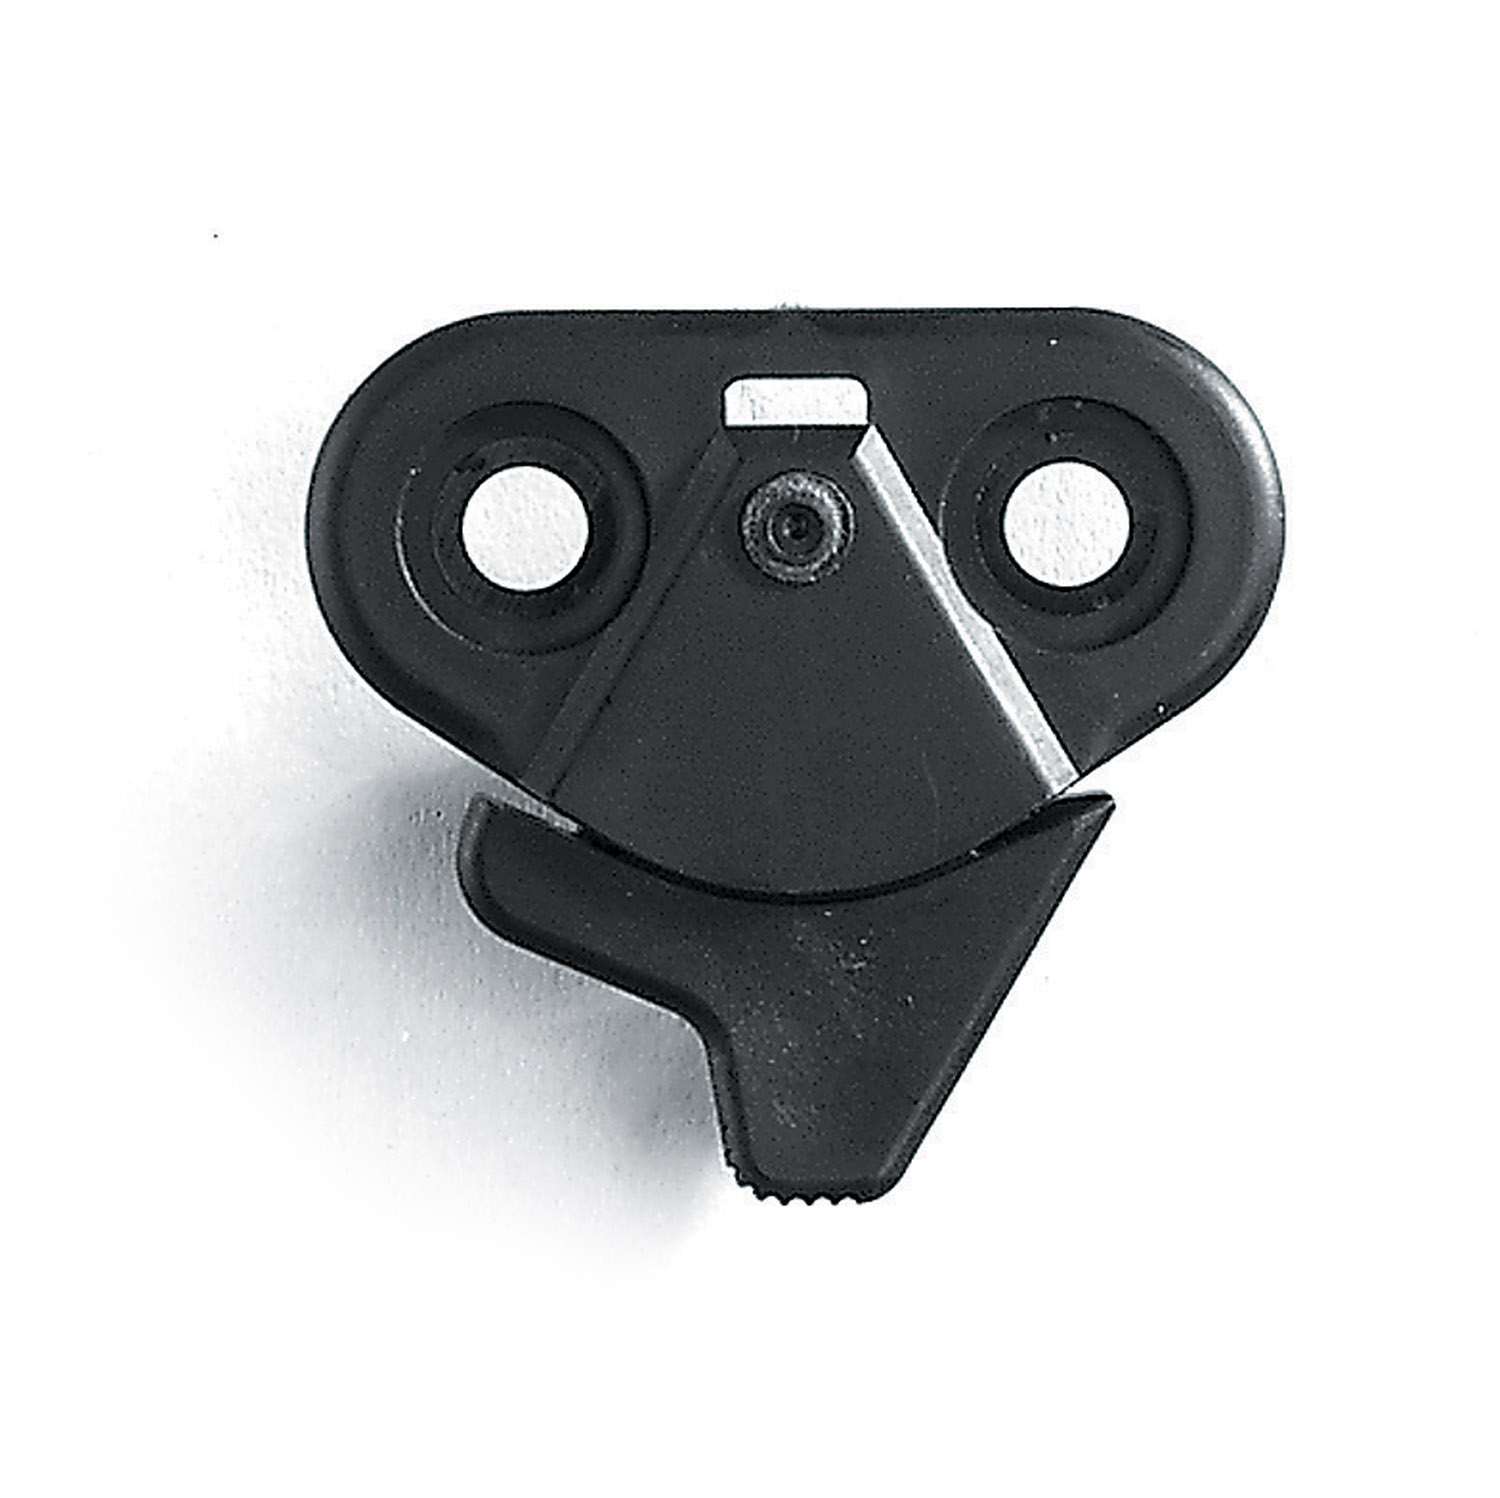 Safariland Optional Sentry Safety Switch for 6004 Holsters